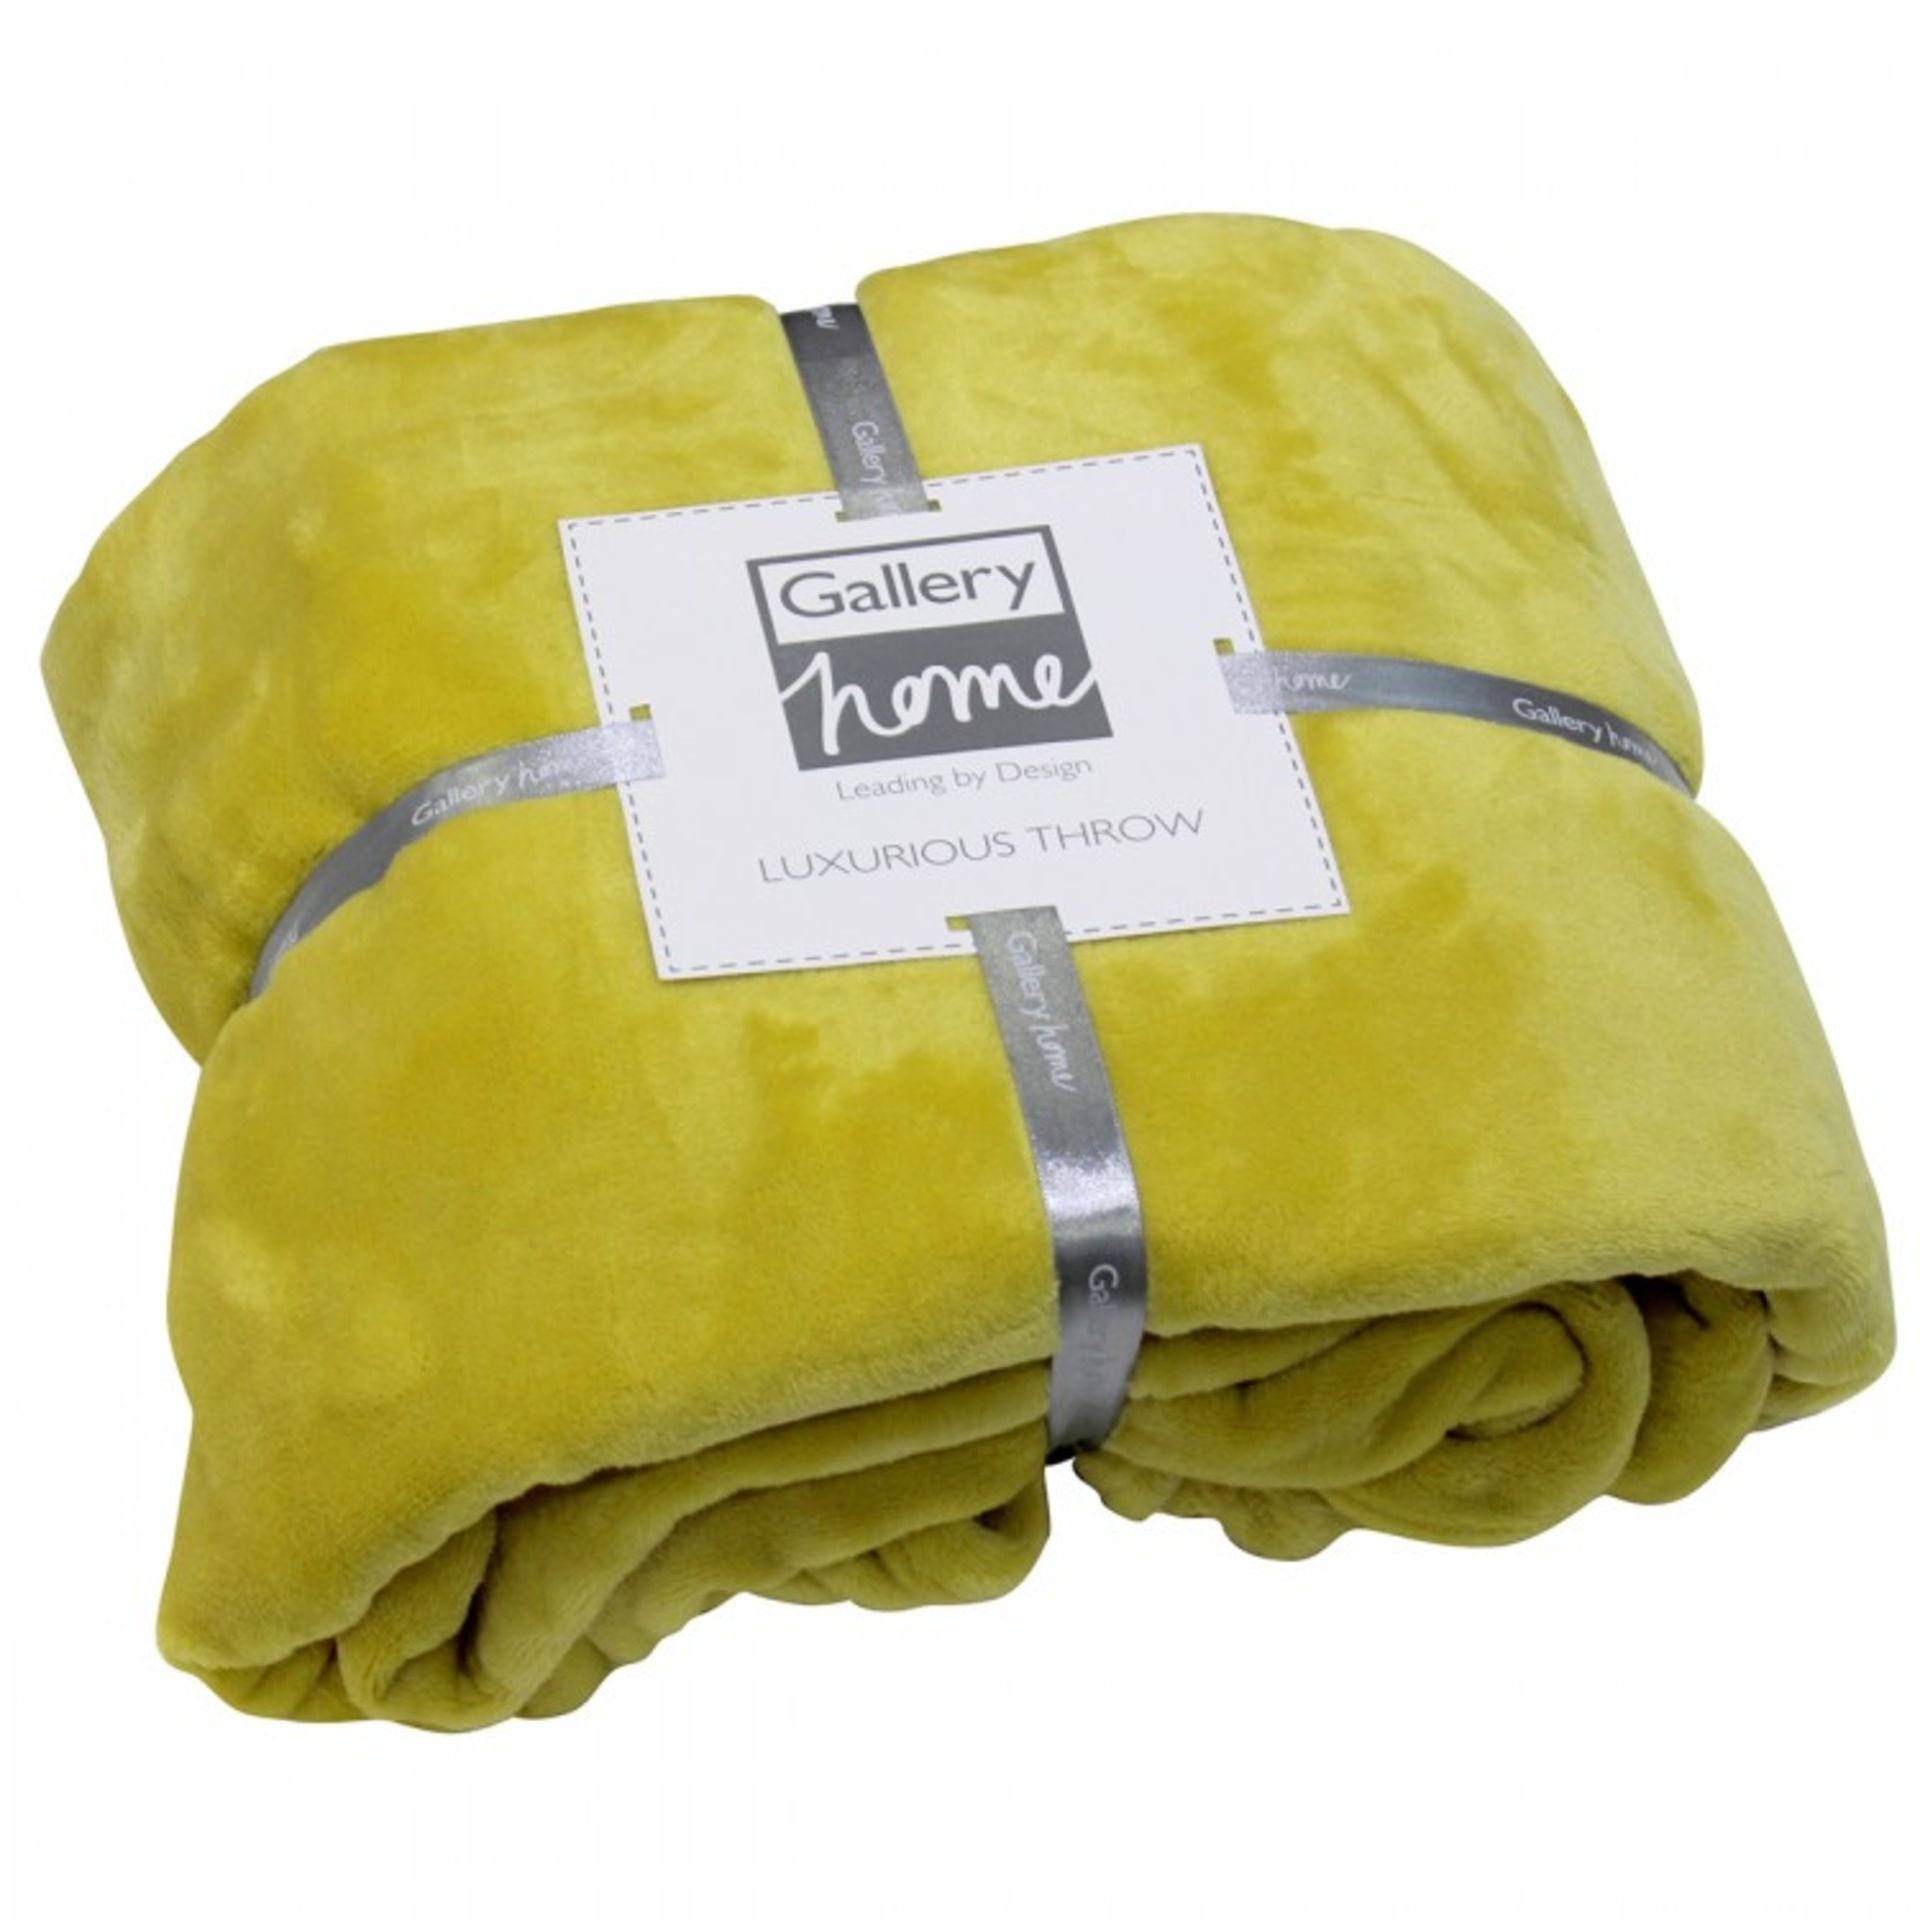 Flannel Fleece Throw Chartreuse Kilburn and Scott Super soft flannel fleece throw fits perfectly - Image 2 of 2